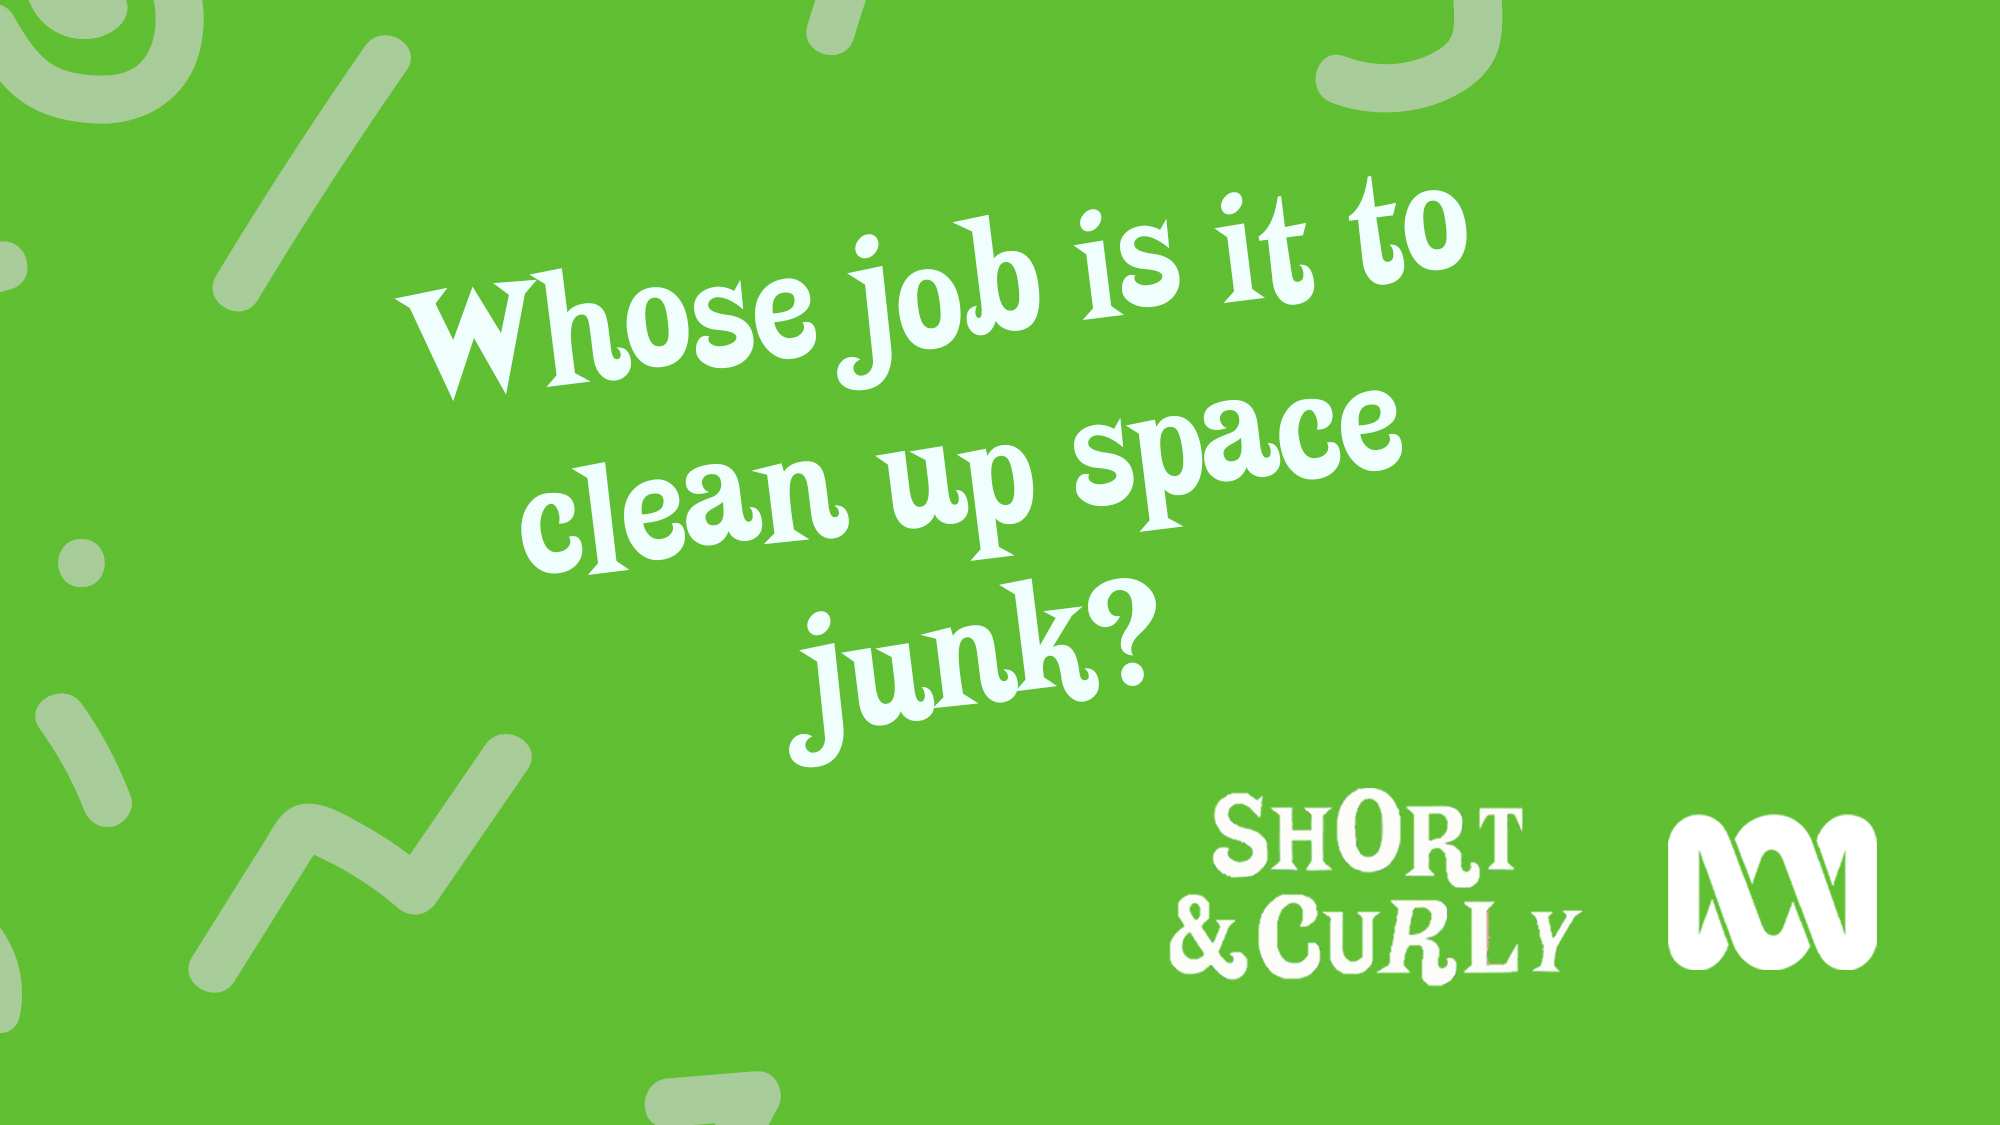 Whose job is it to clean up space junk?